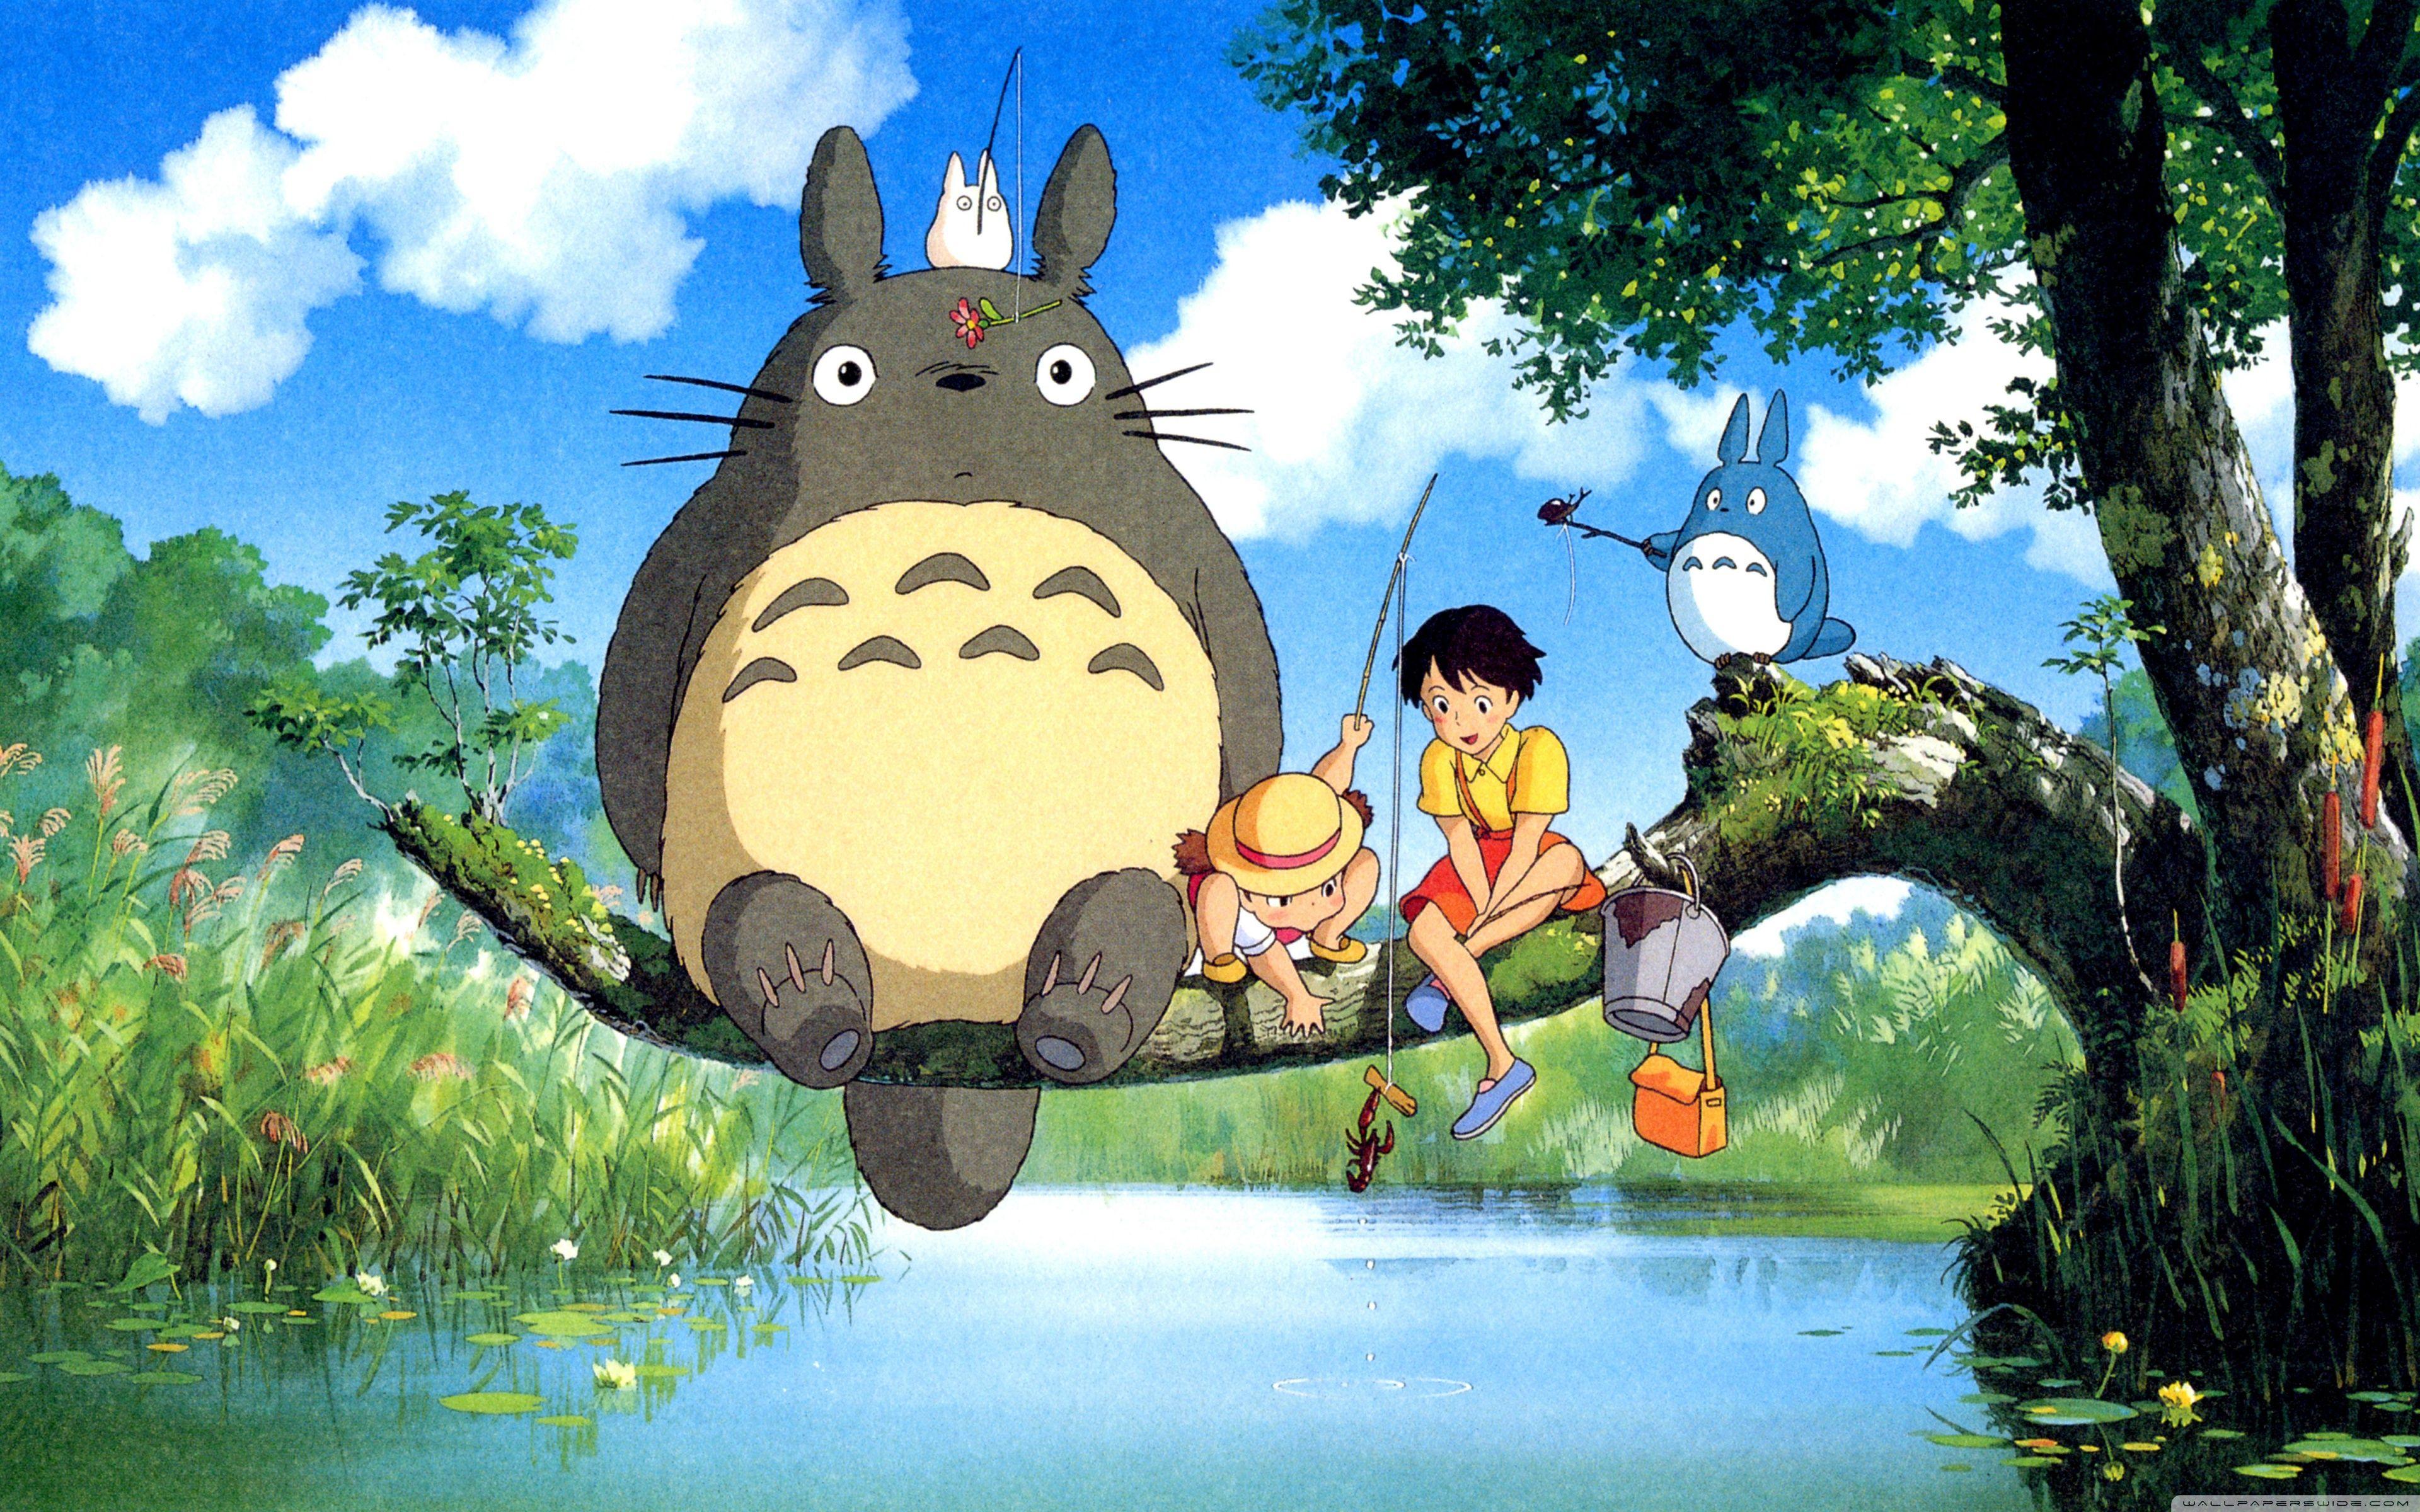 Where to download studio ghibli movies online